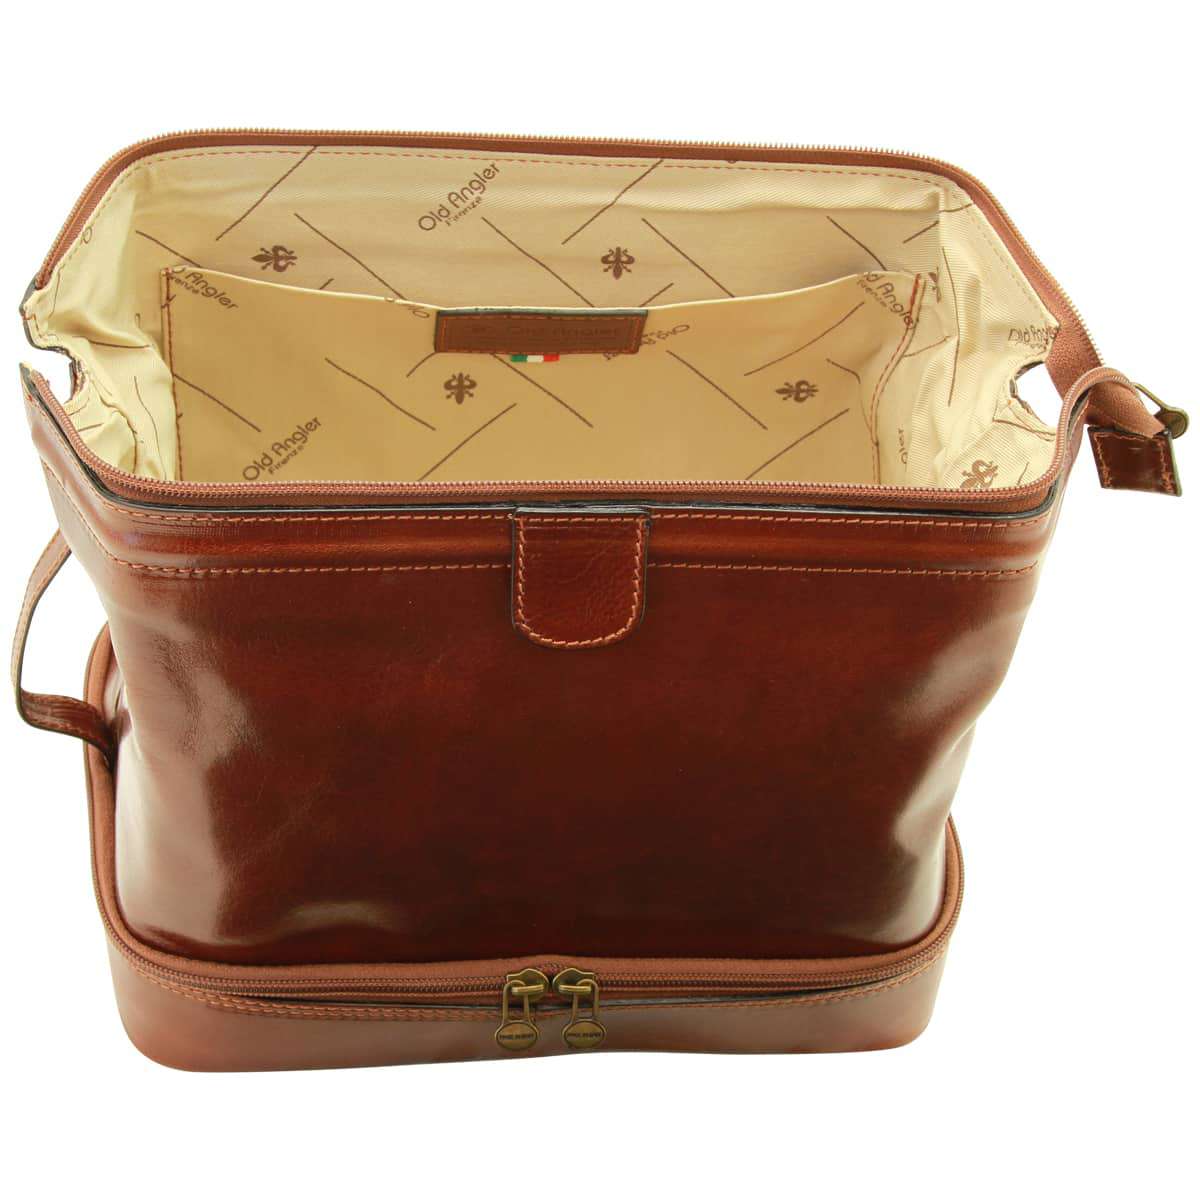 Cowhide leather travel kit - Brown | 066205MA US | Old Angler Firenze